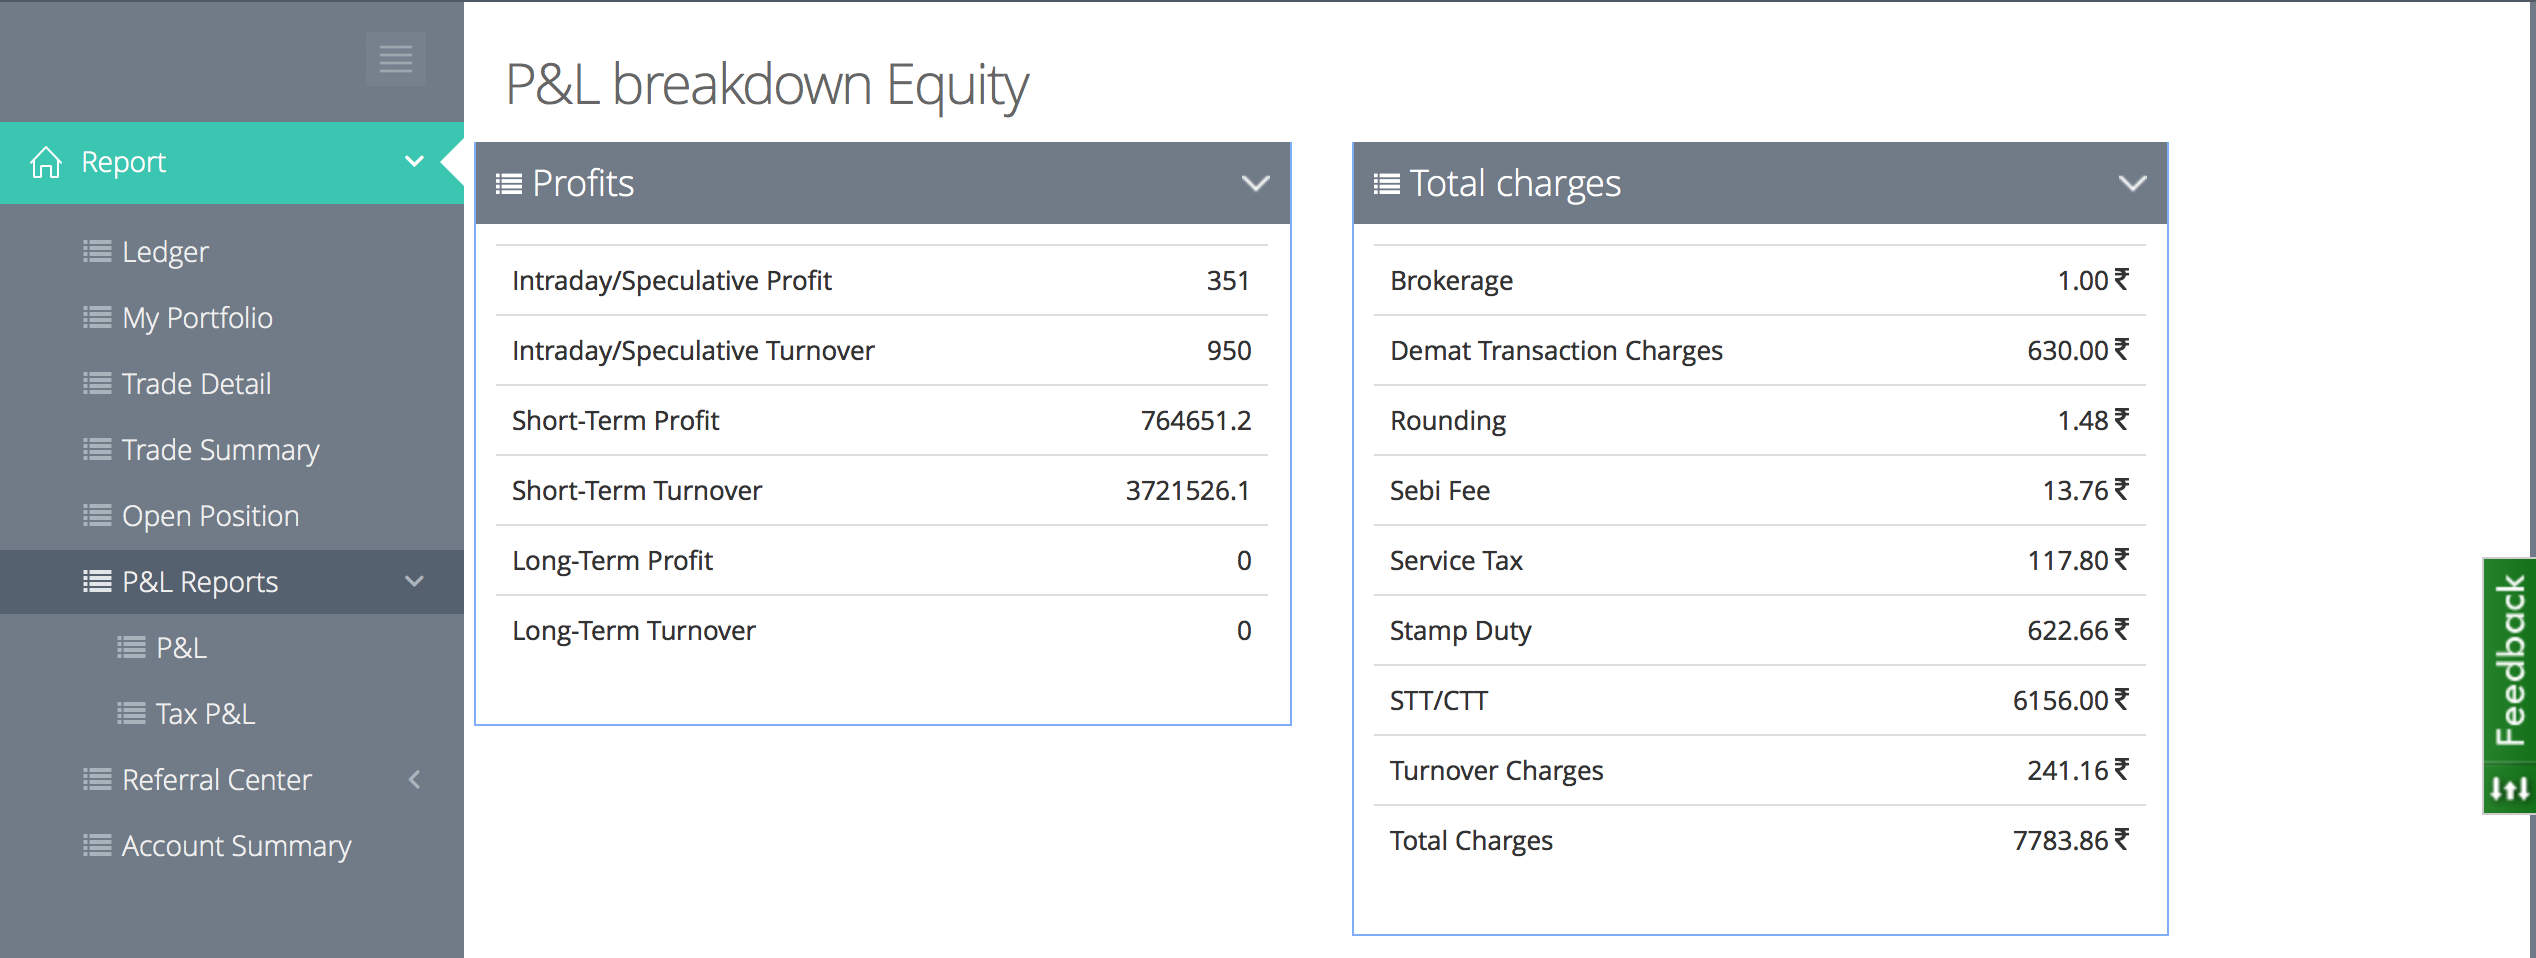 equity charges breakdown box tradesmart backoffice